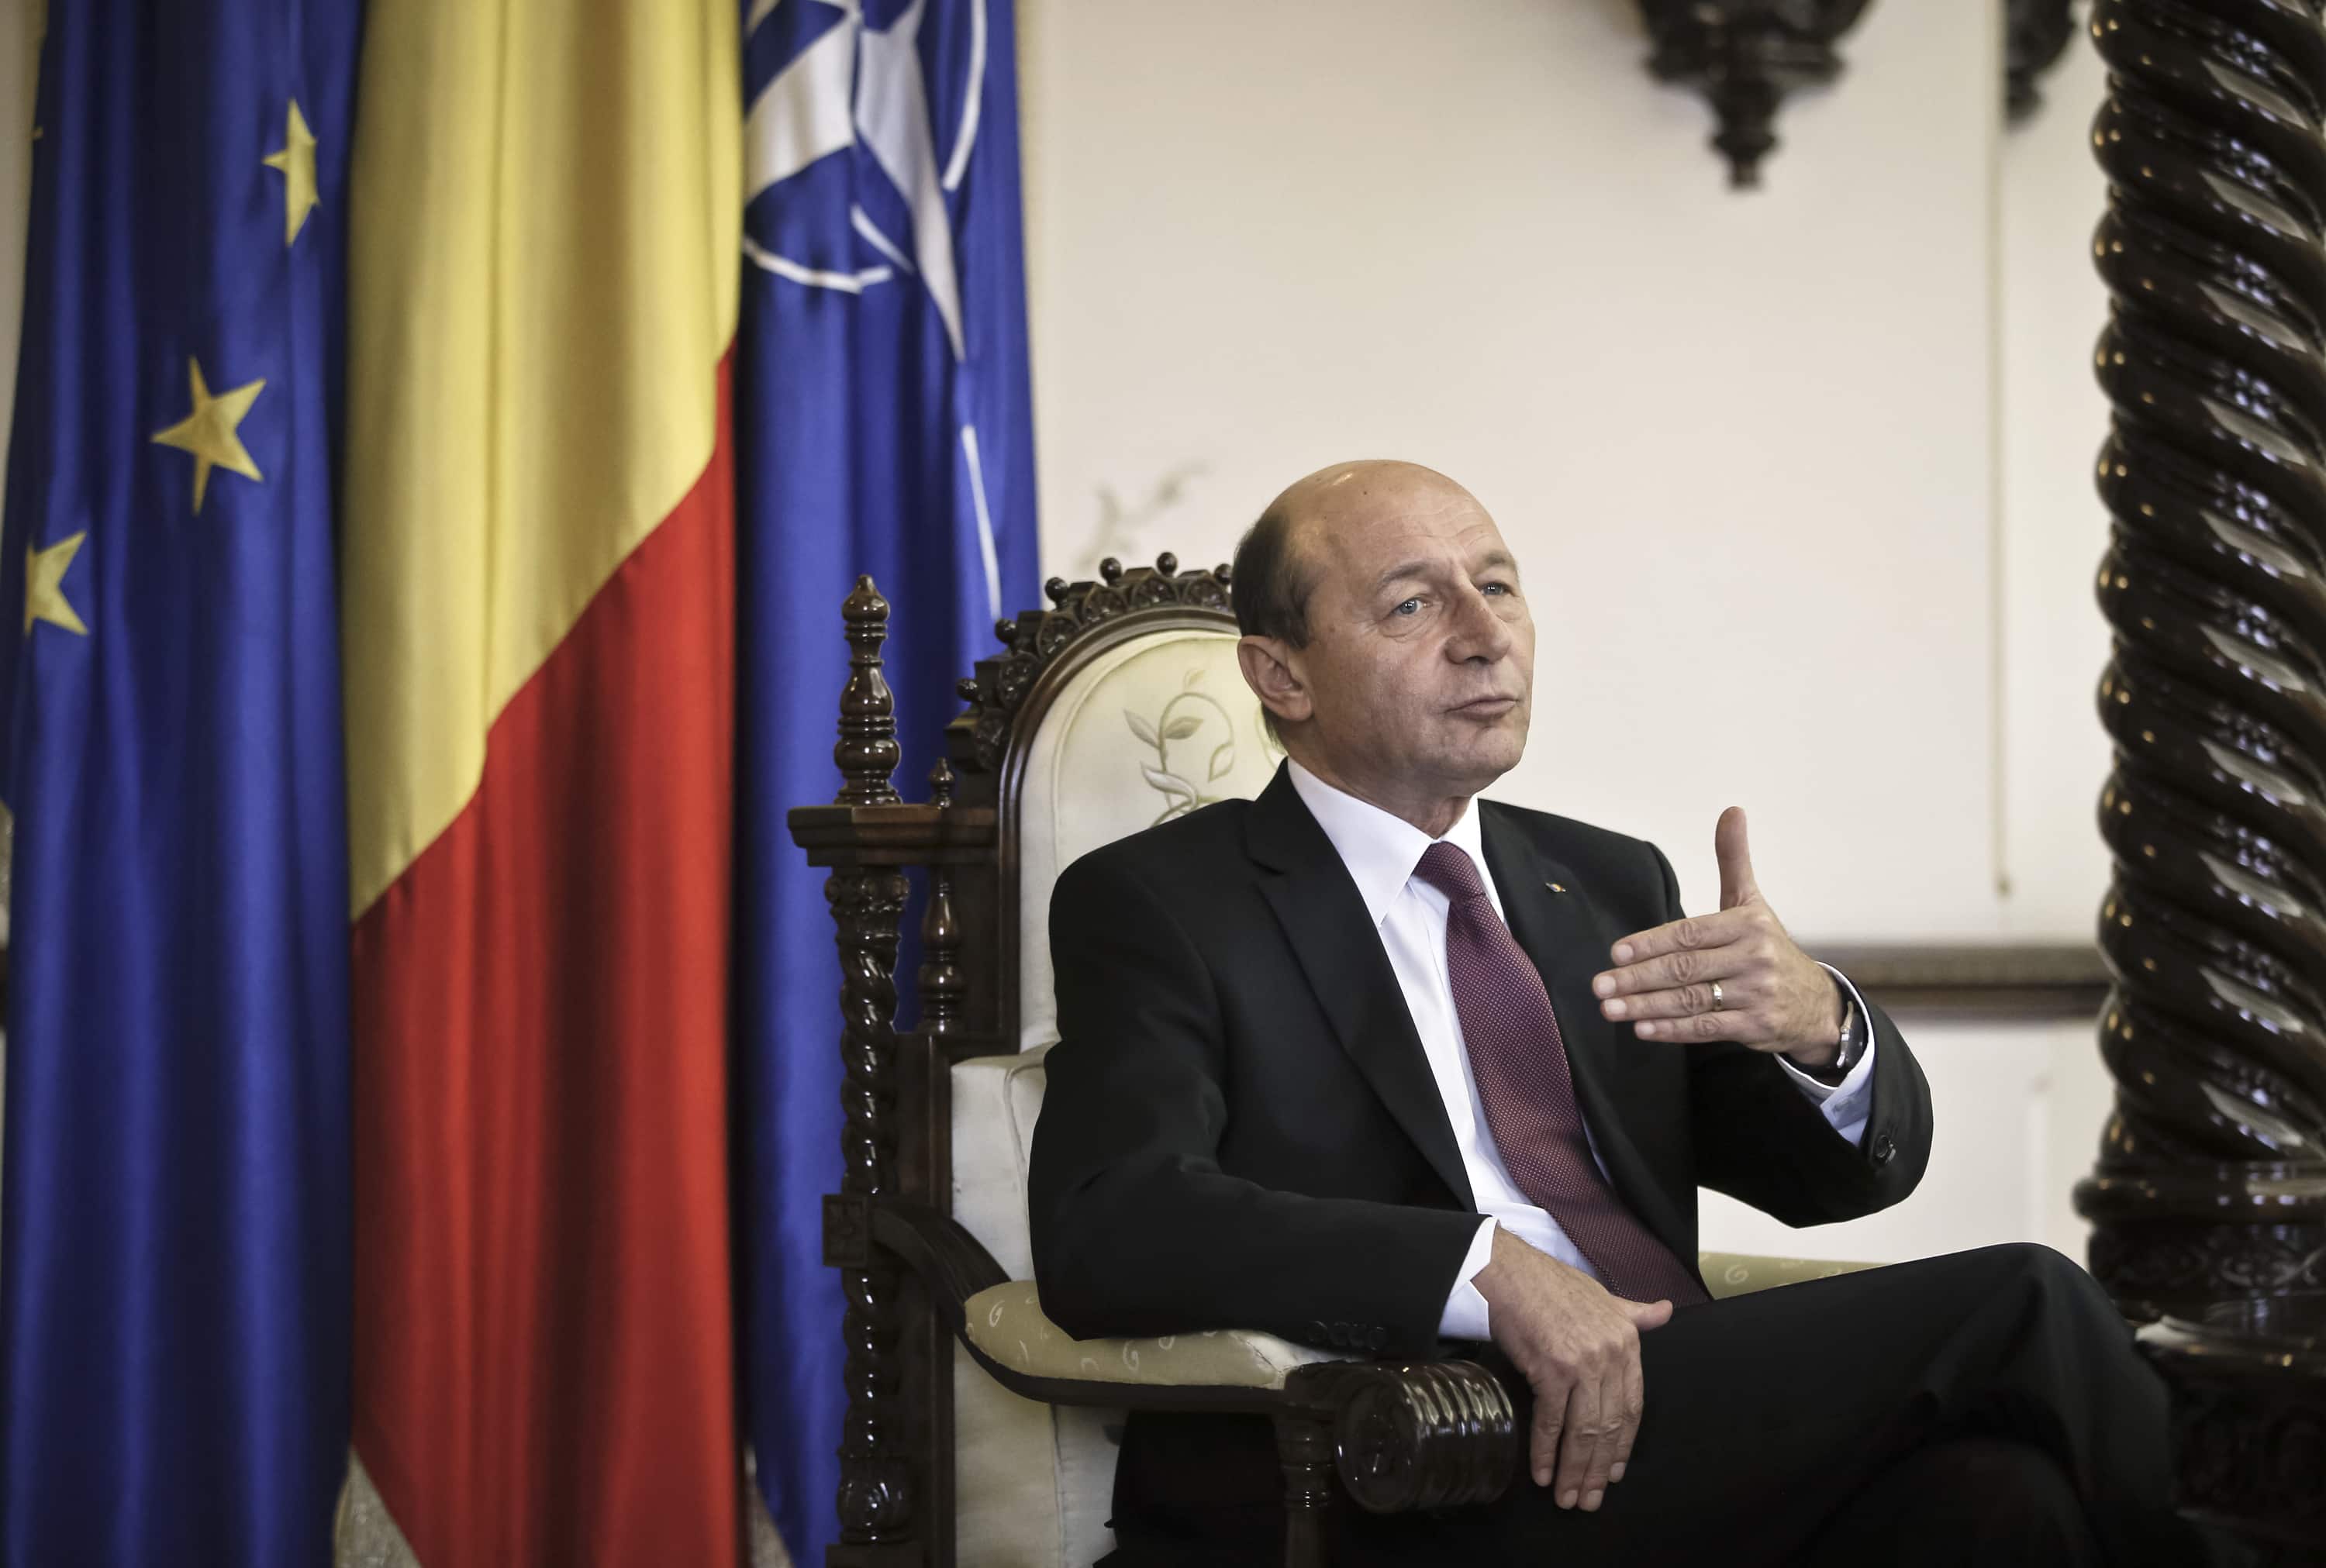 Romanian President Traian Basescu gestures during an interview with the Associated Press in Bucharest, Romania, 7 March 2013., AP Photo/Vadim Ghirda